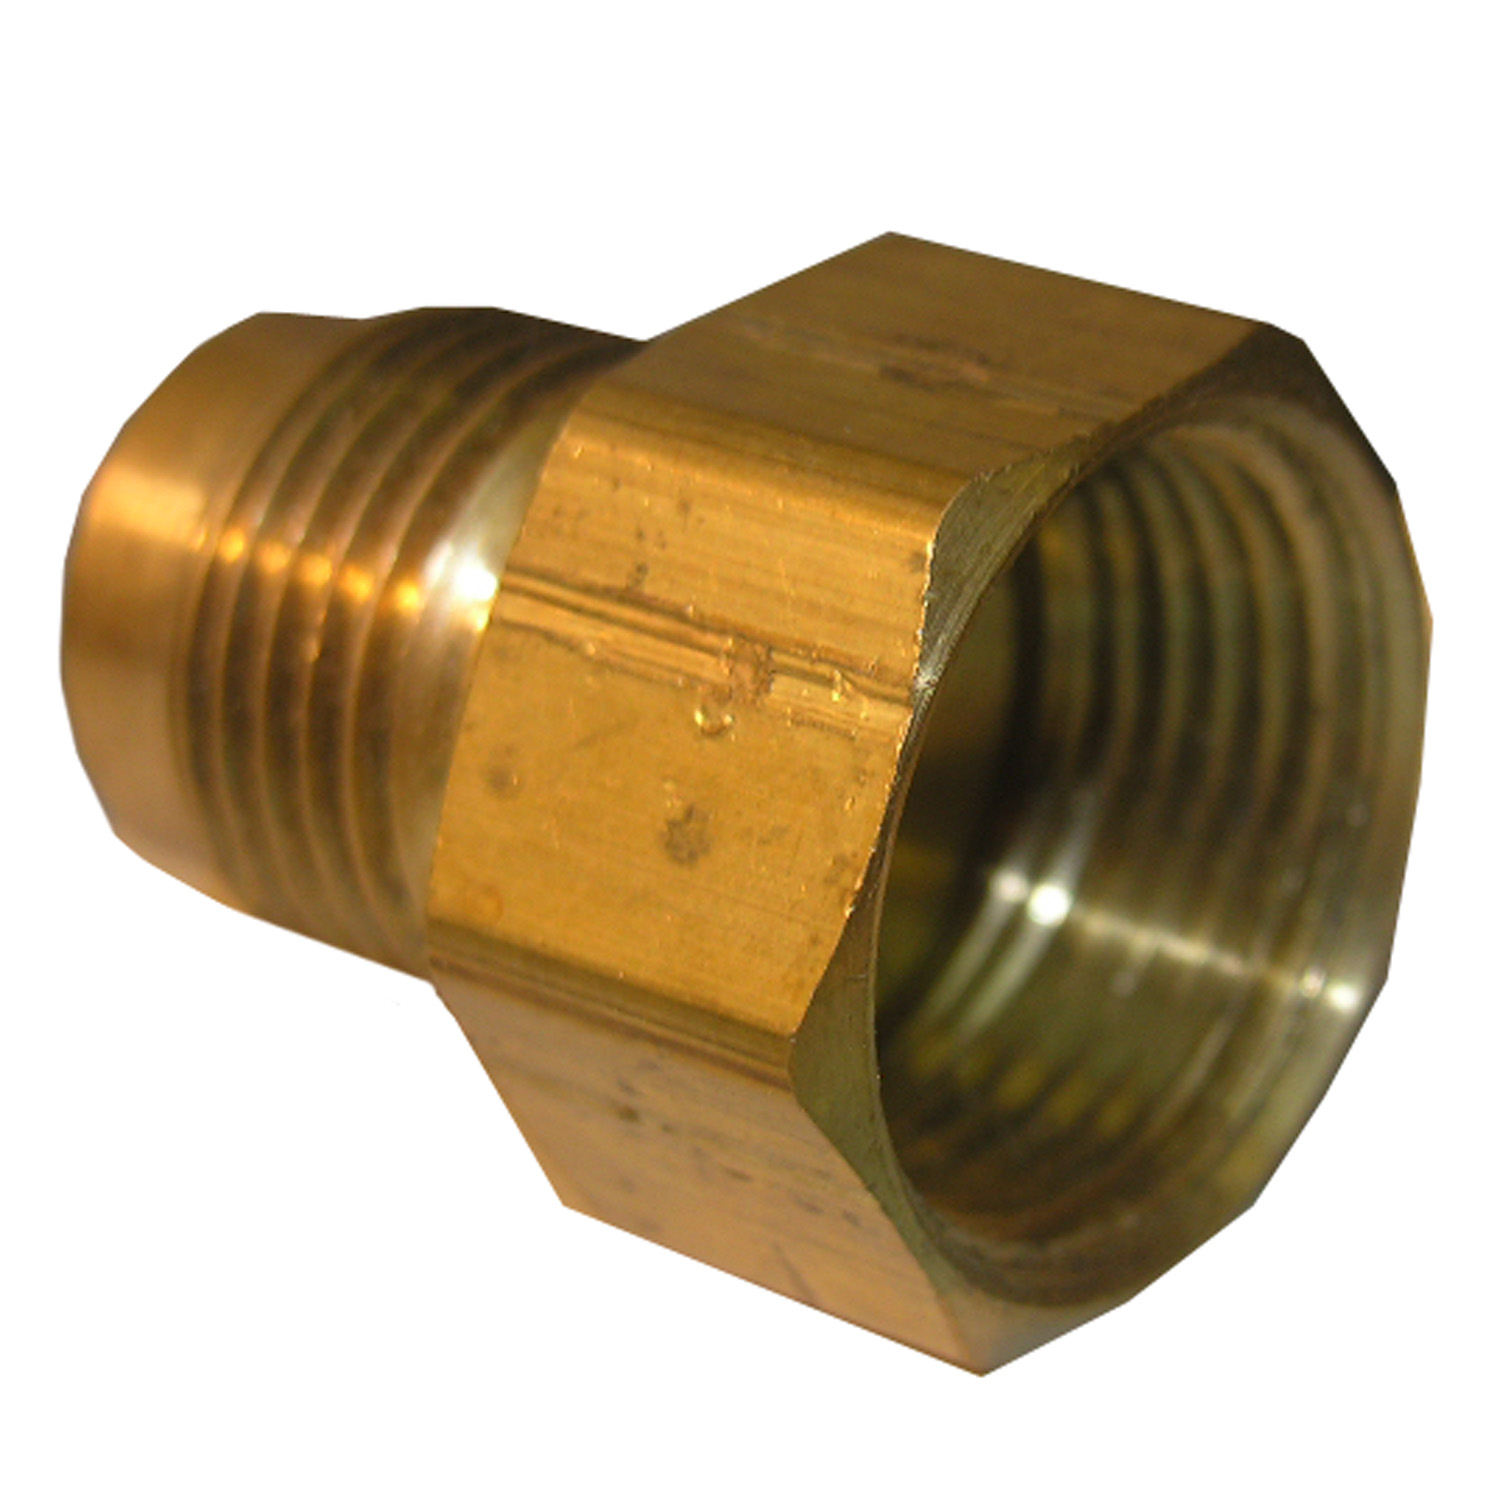 17-4655 Pipe Adapter, 5/8 x 1/2 in, Male Flare x FPT, Brass, 640 psi Pressure